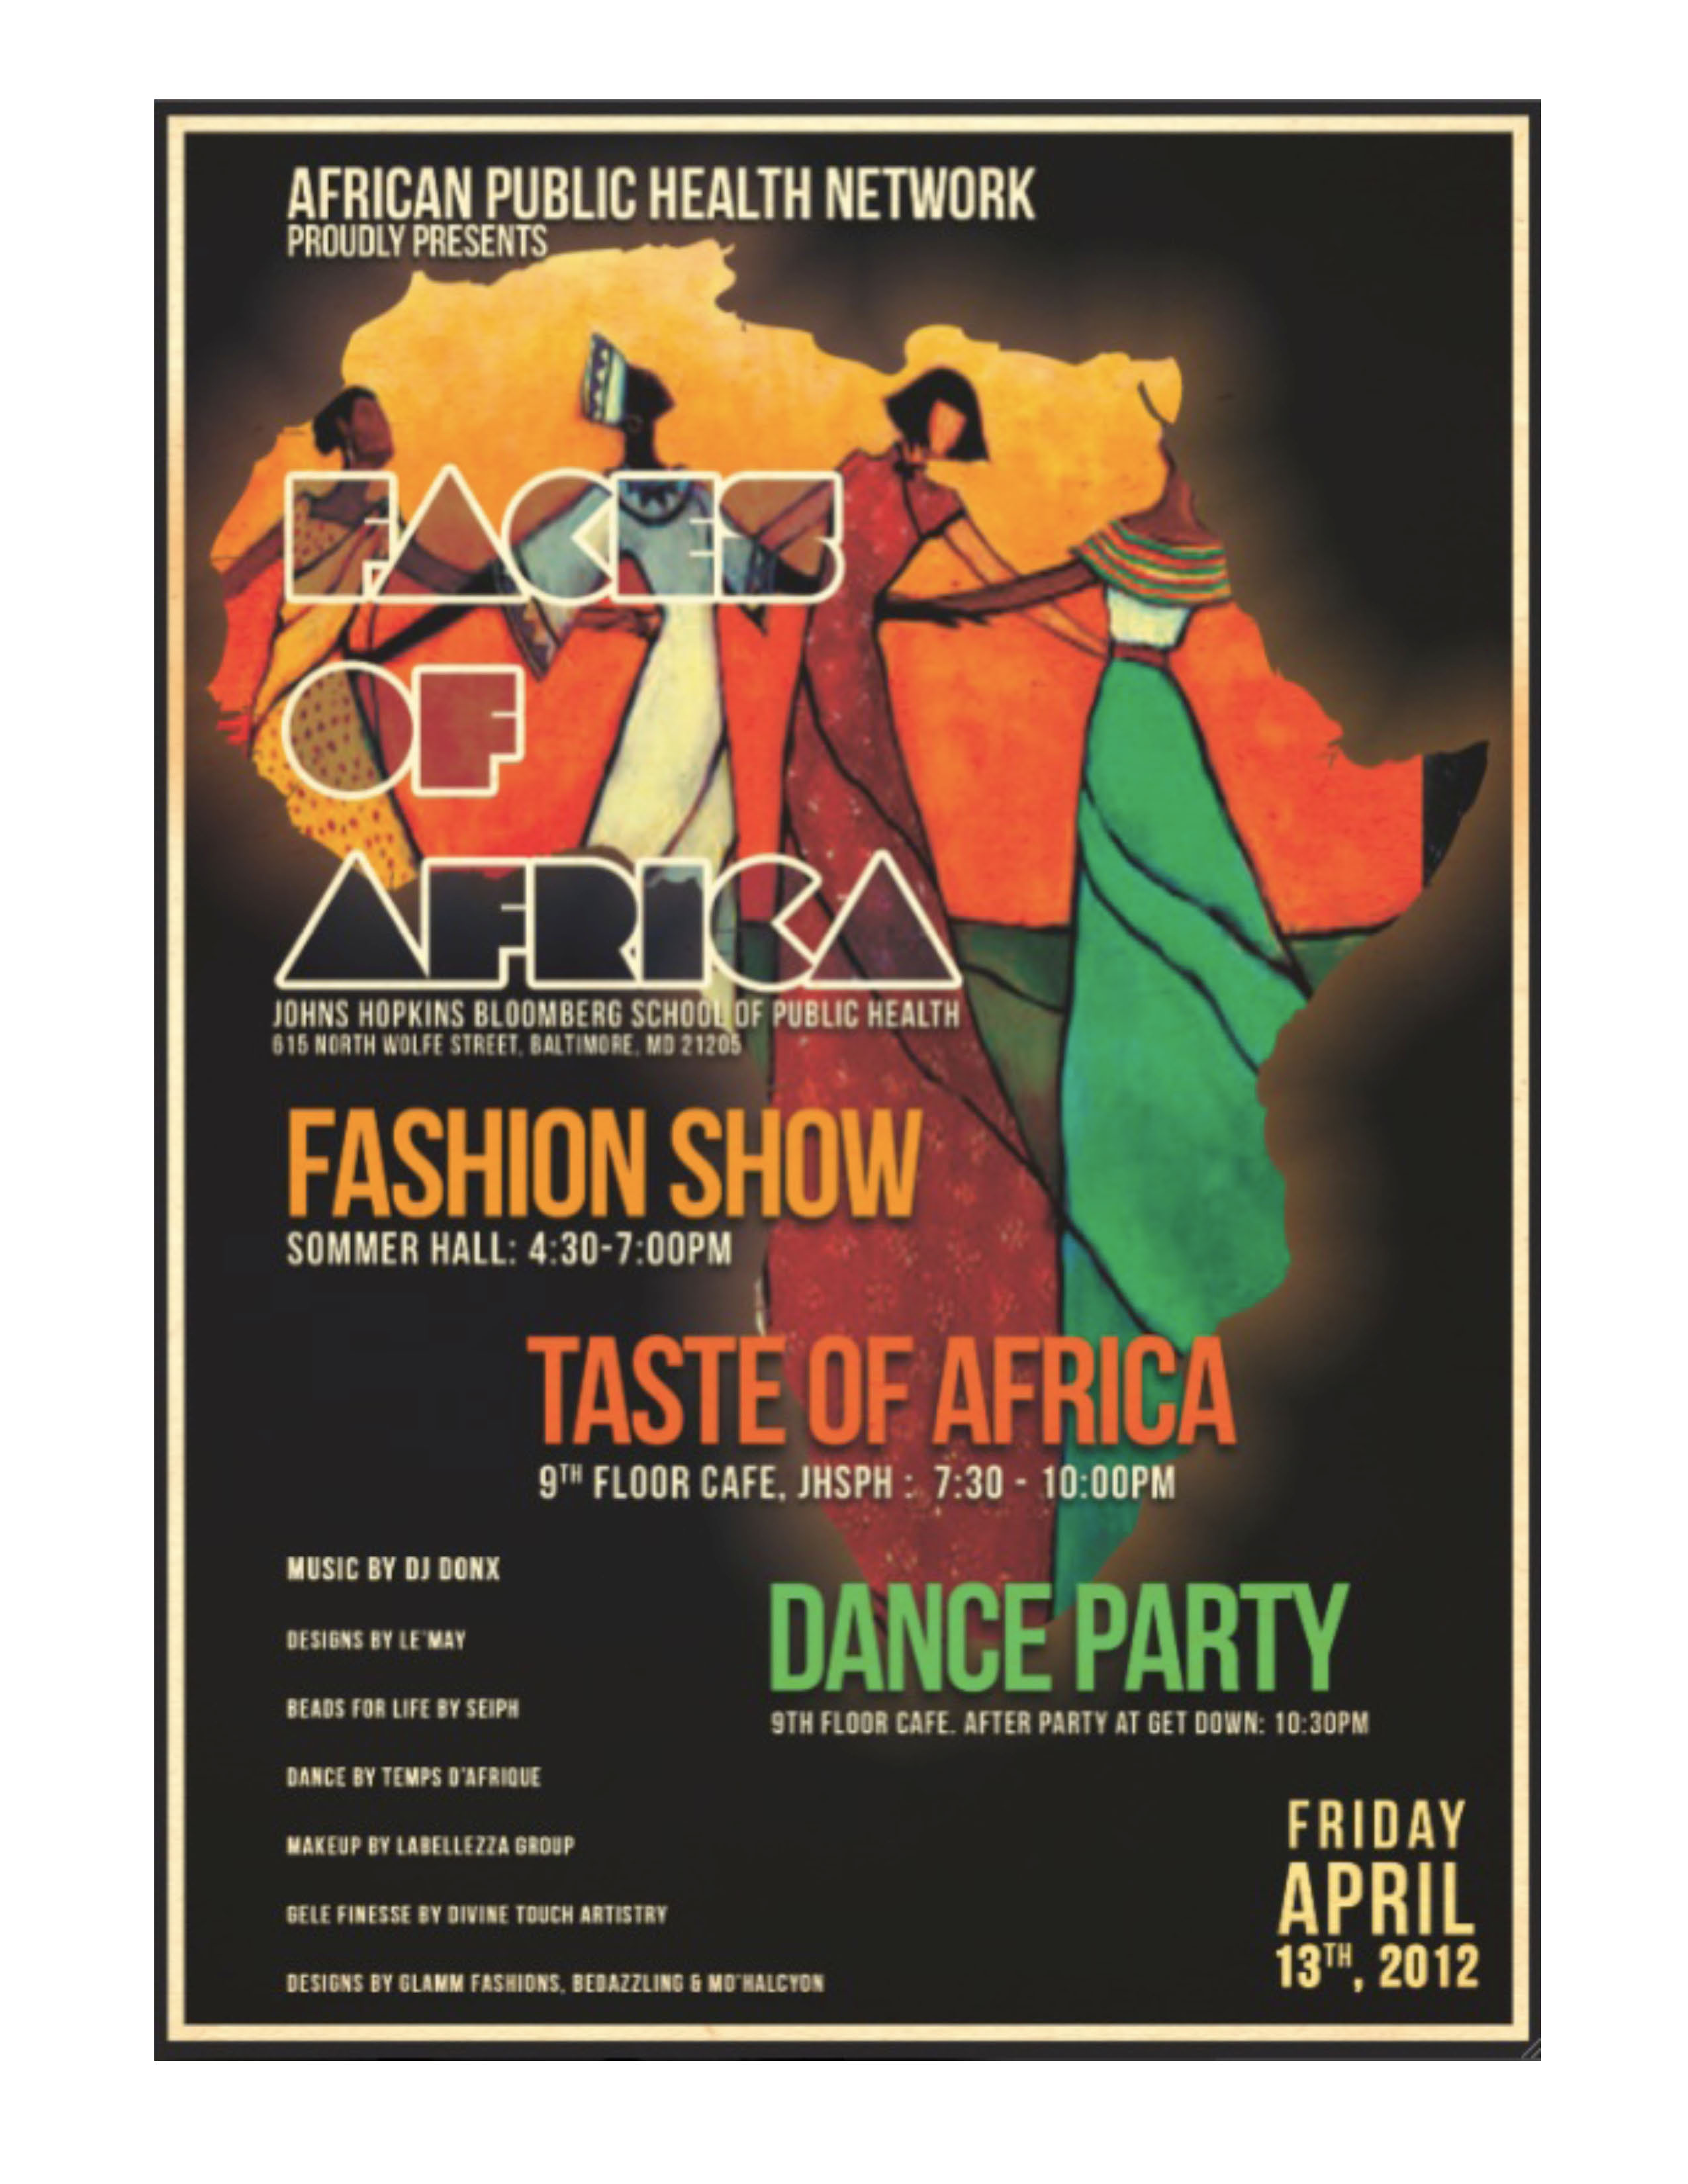 Faces of Africa 2012